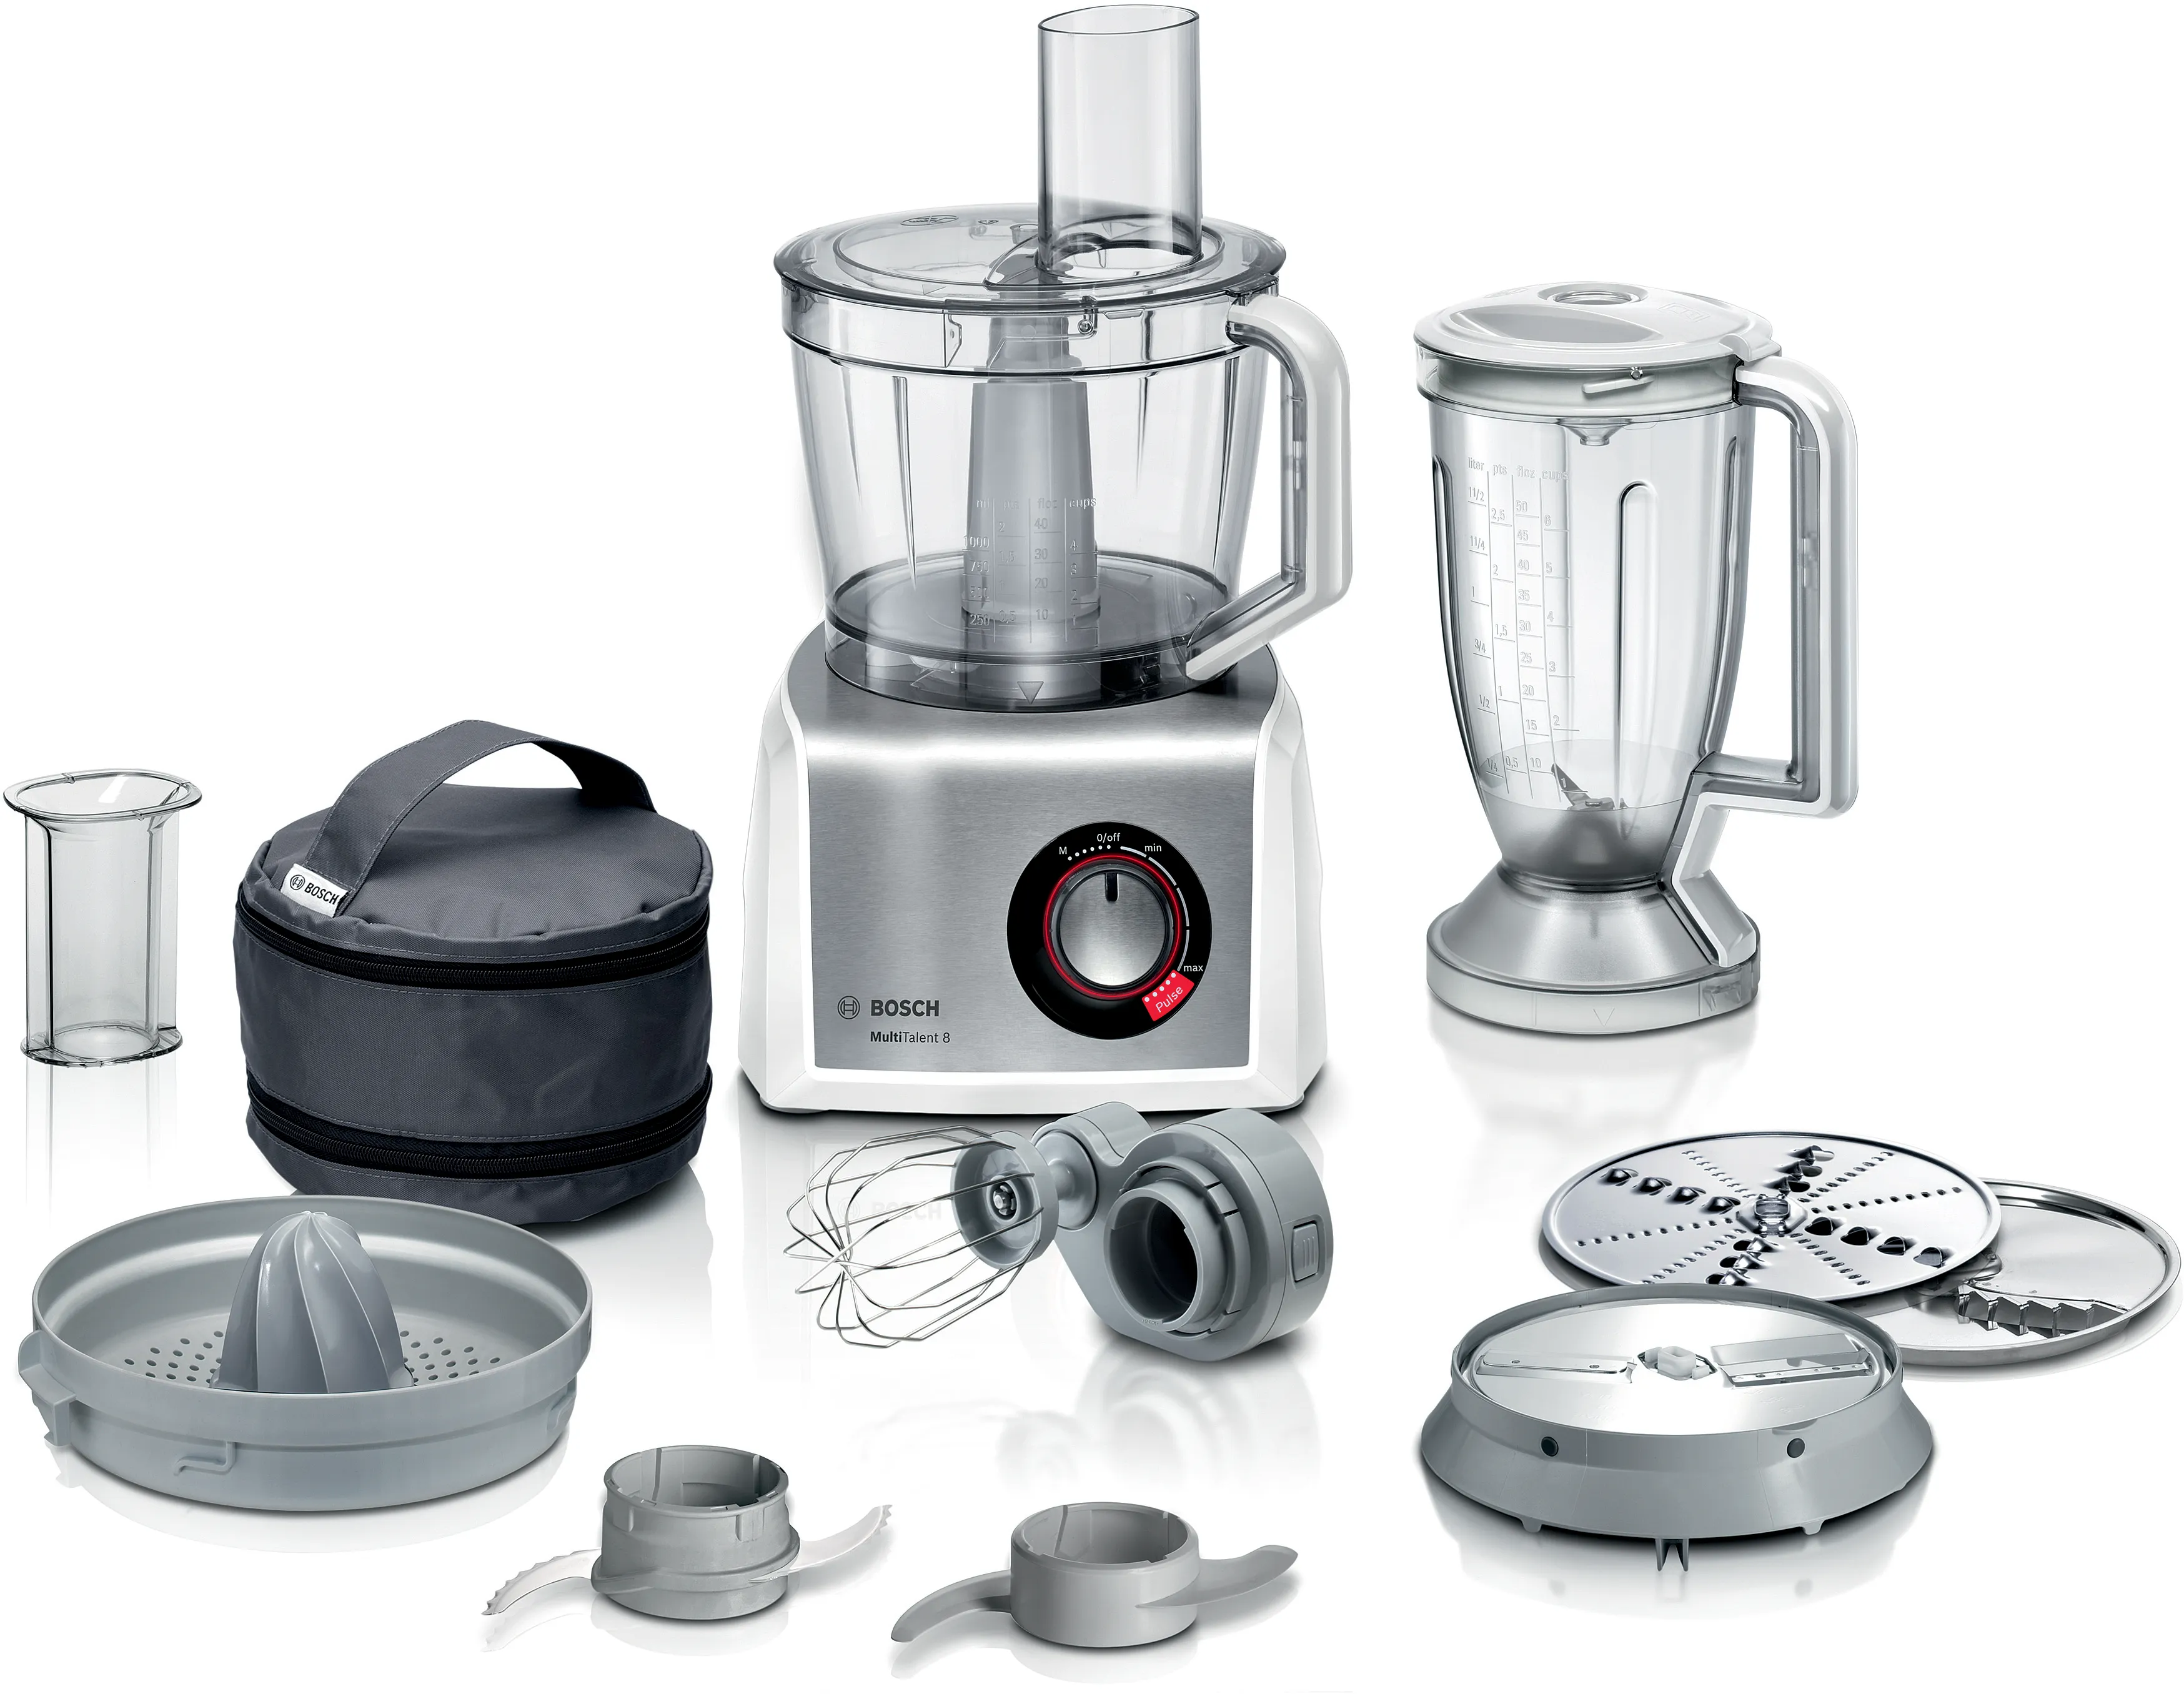 Food processor MultiTalent 8 1200 W White, Brushed stainless steel 